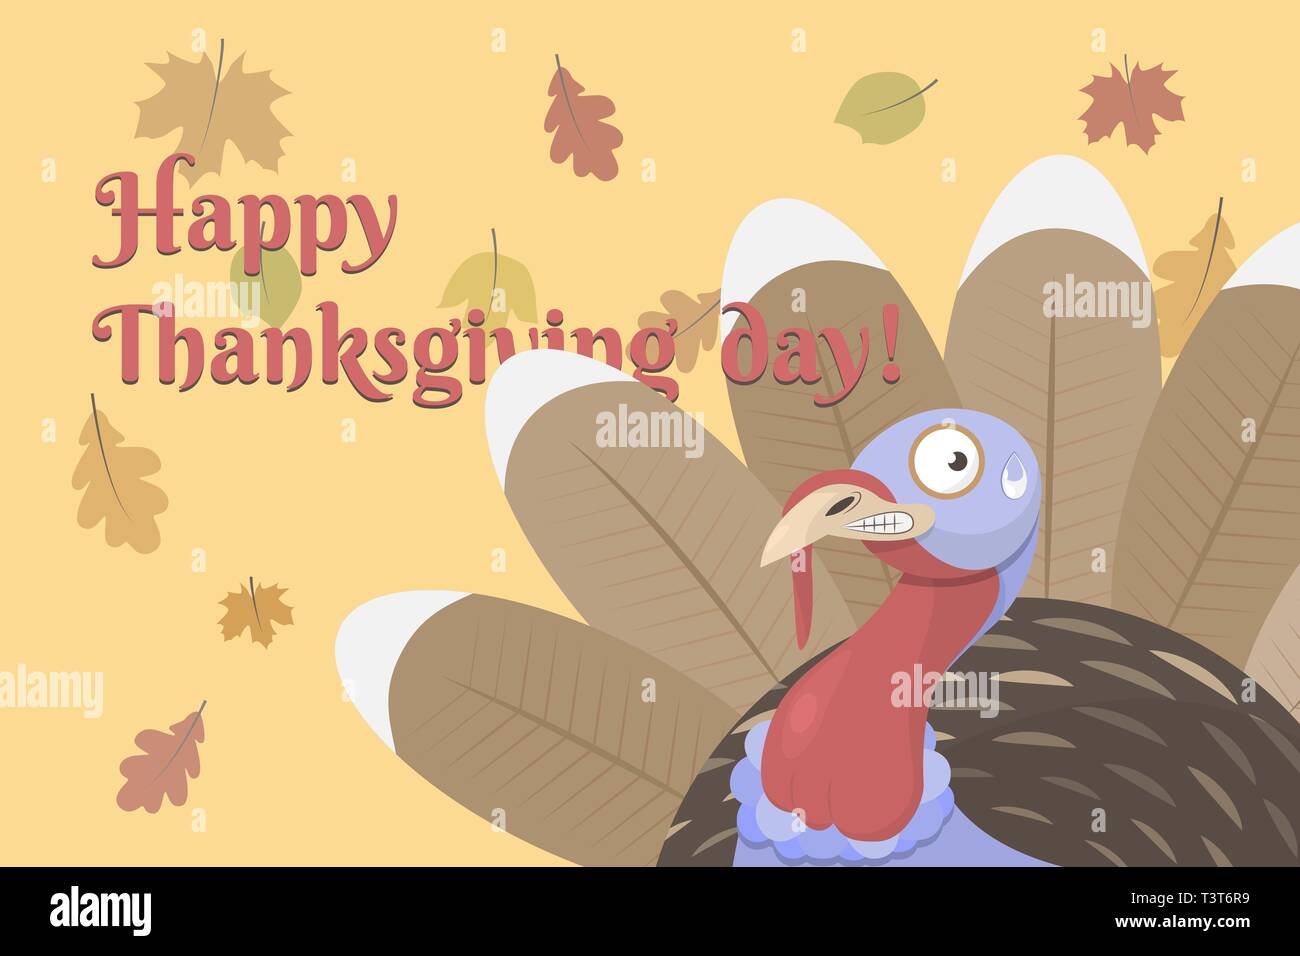 Flat vector illustration of happy thanksgiving day it shows a cute frightened cartoon turkey and autumn leaves. The bird has brown, red, blue. Stock Vector